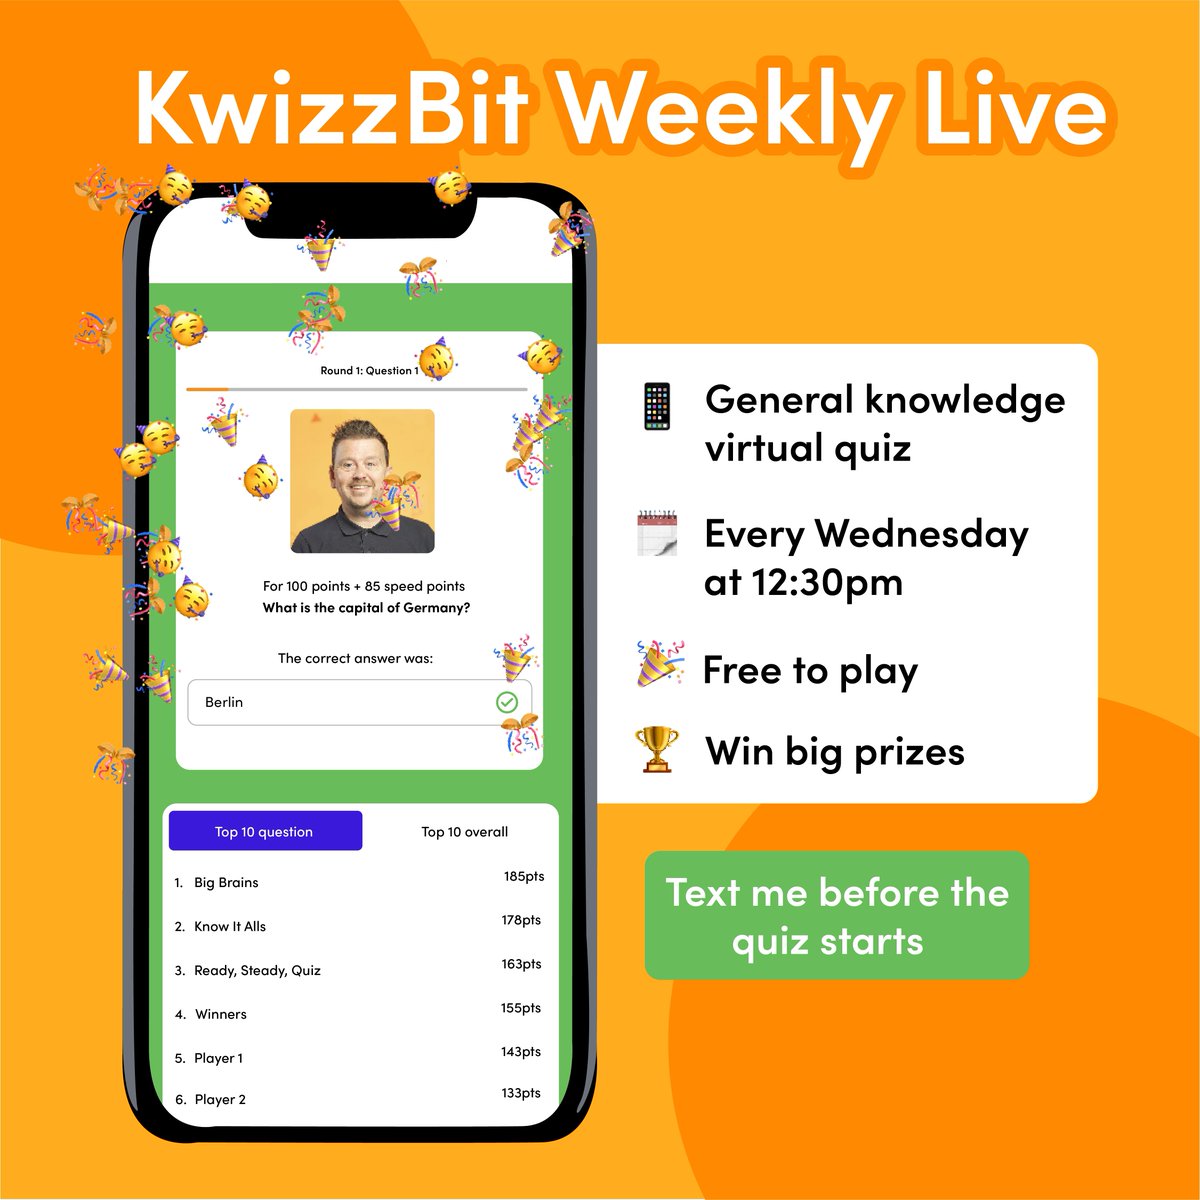 We've arrived at your last chance to win this month's quiz league and take home the prize. Have you got what it takes to top the tables? Join us here in 10 minutes to find out: bit.ly/4apDE2x